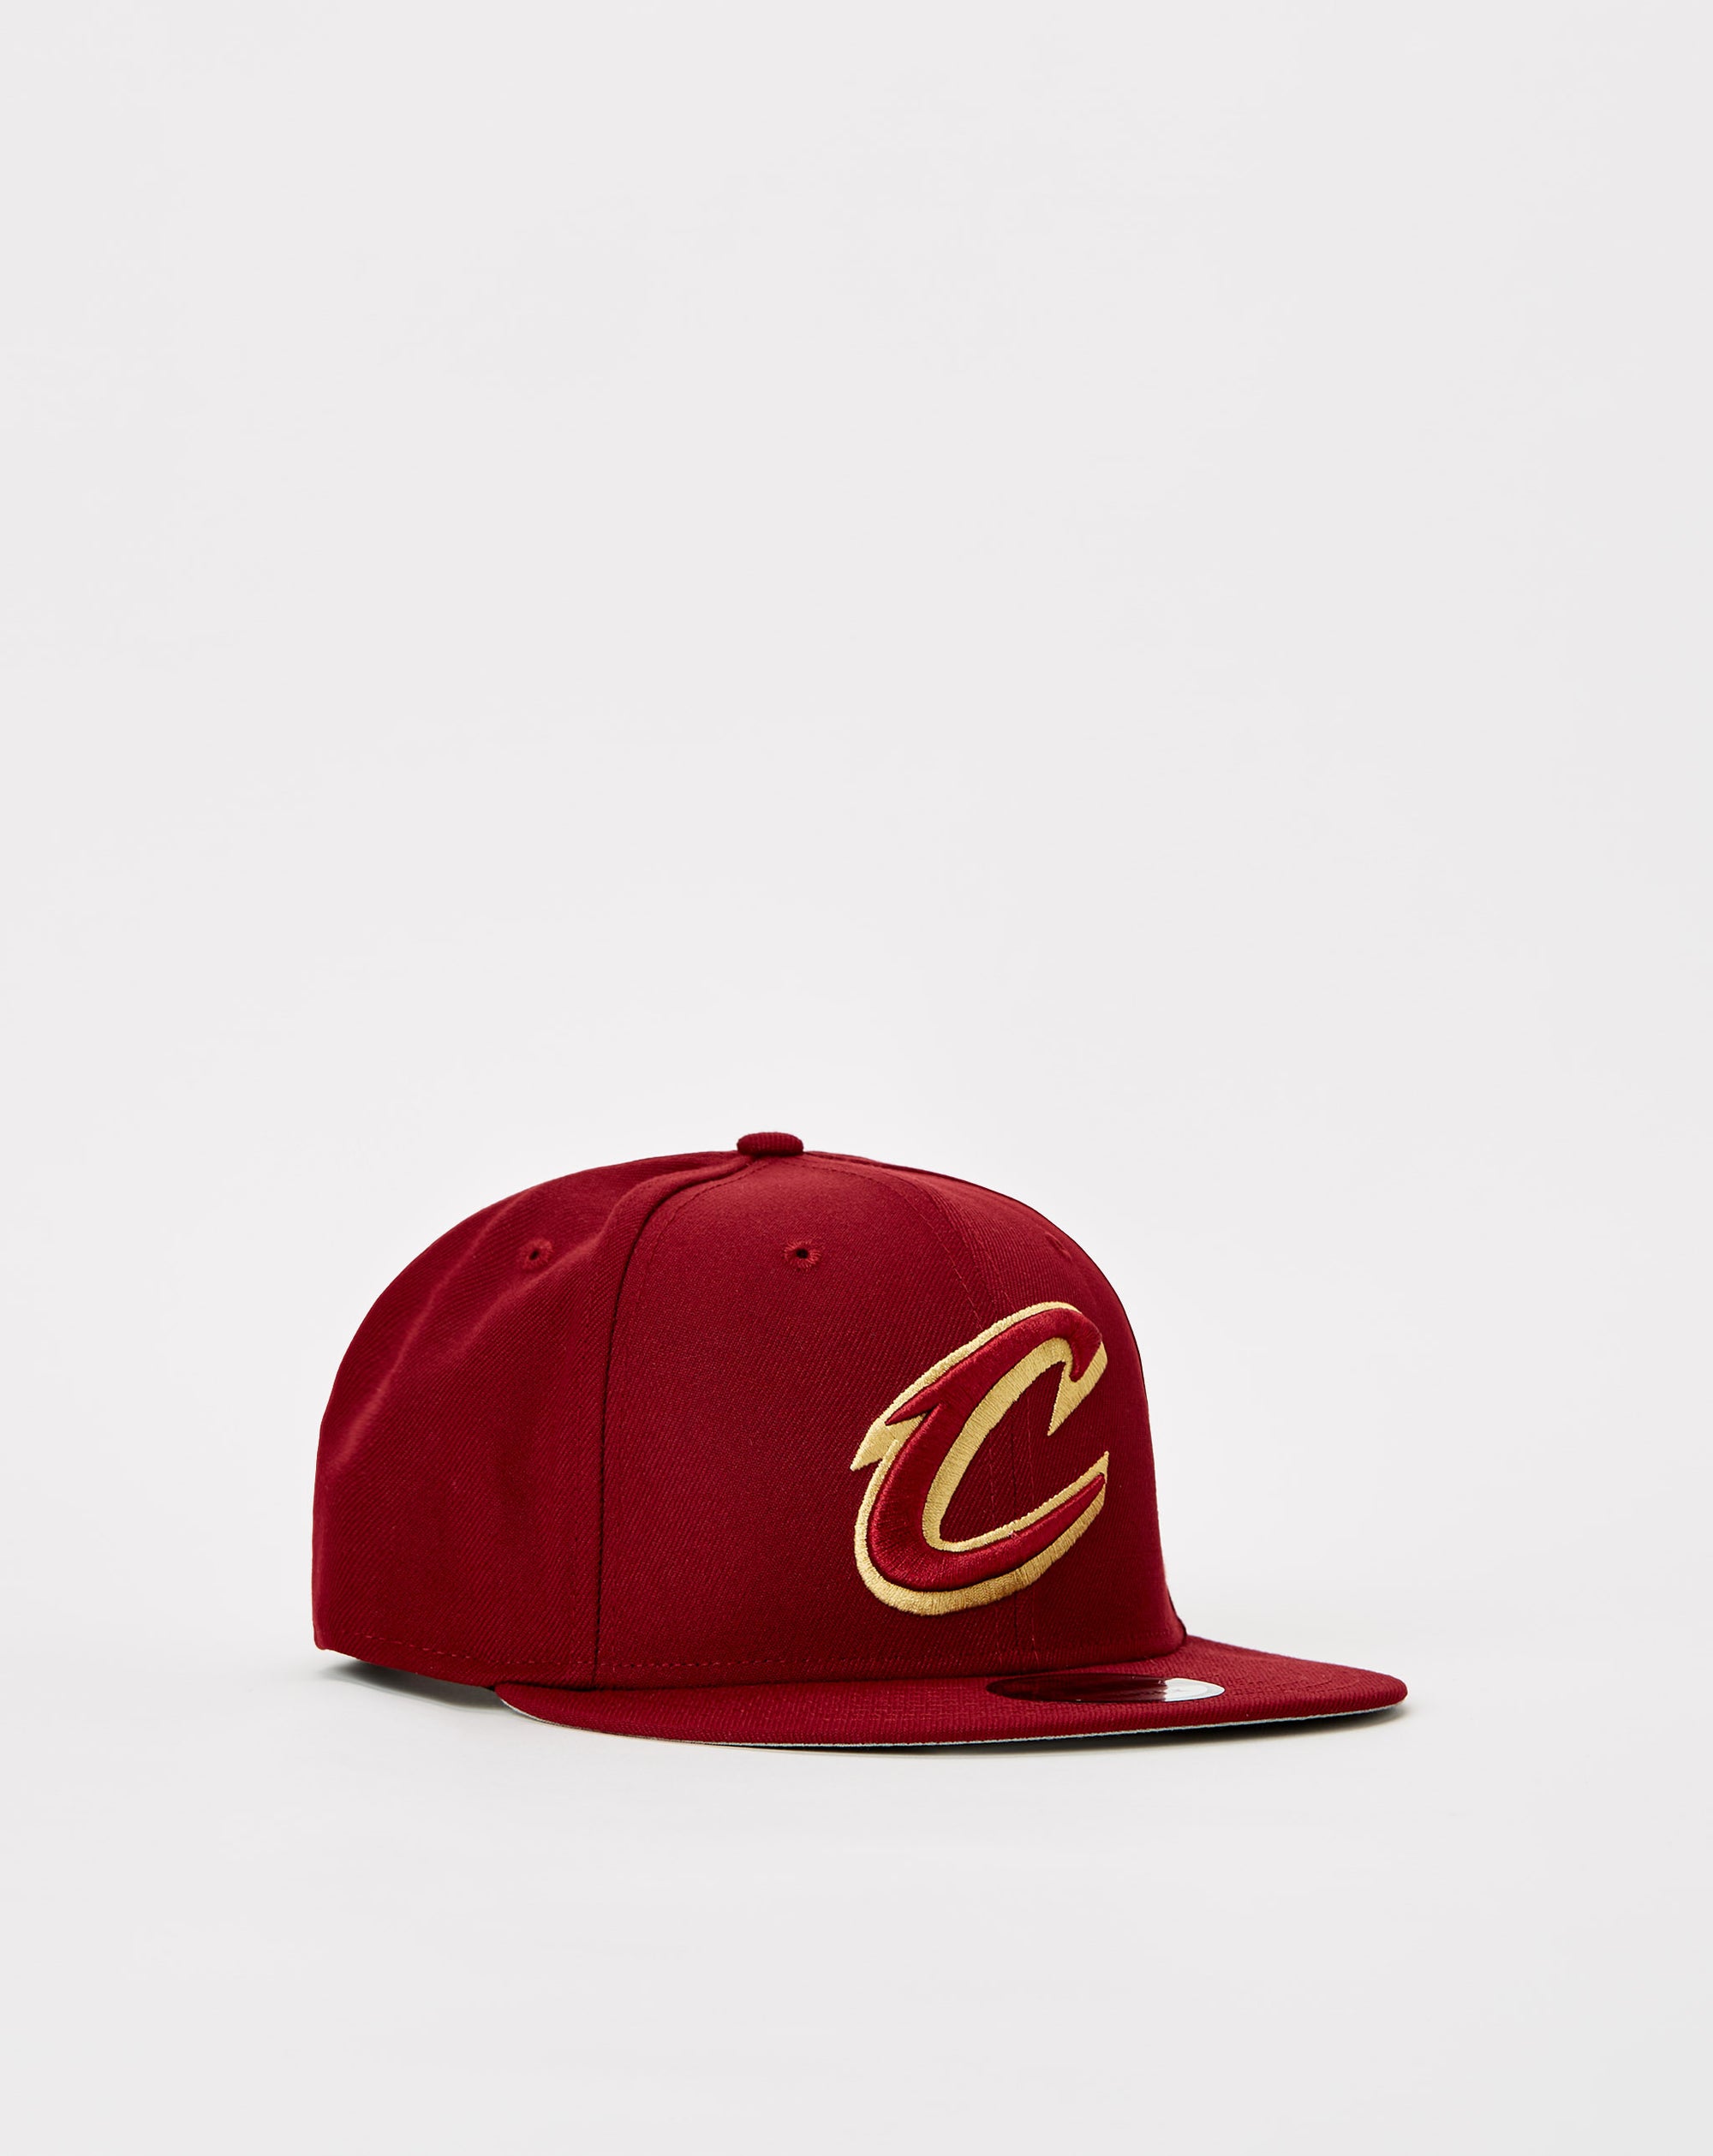 New Era NBA 950 Cleveland Cavaliers - Rule of Next Accessories